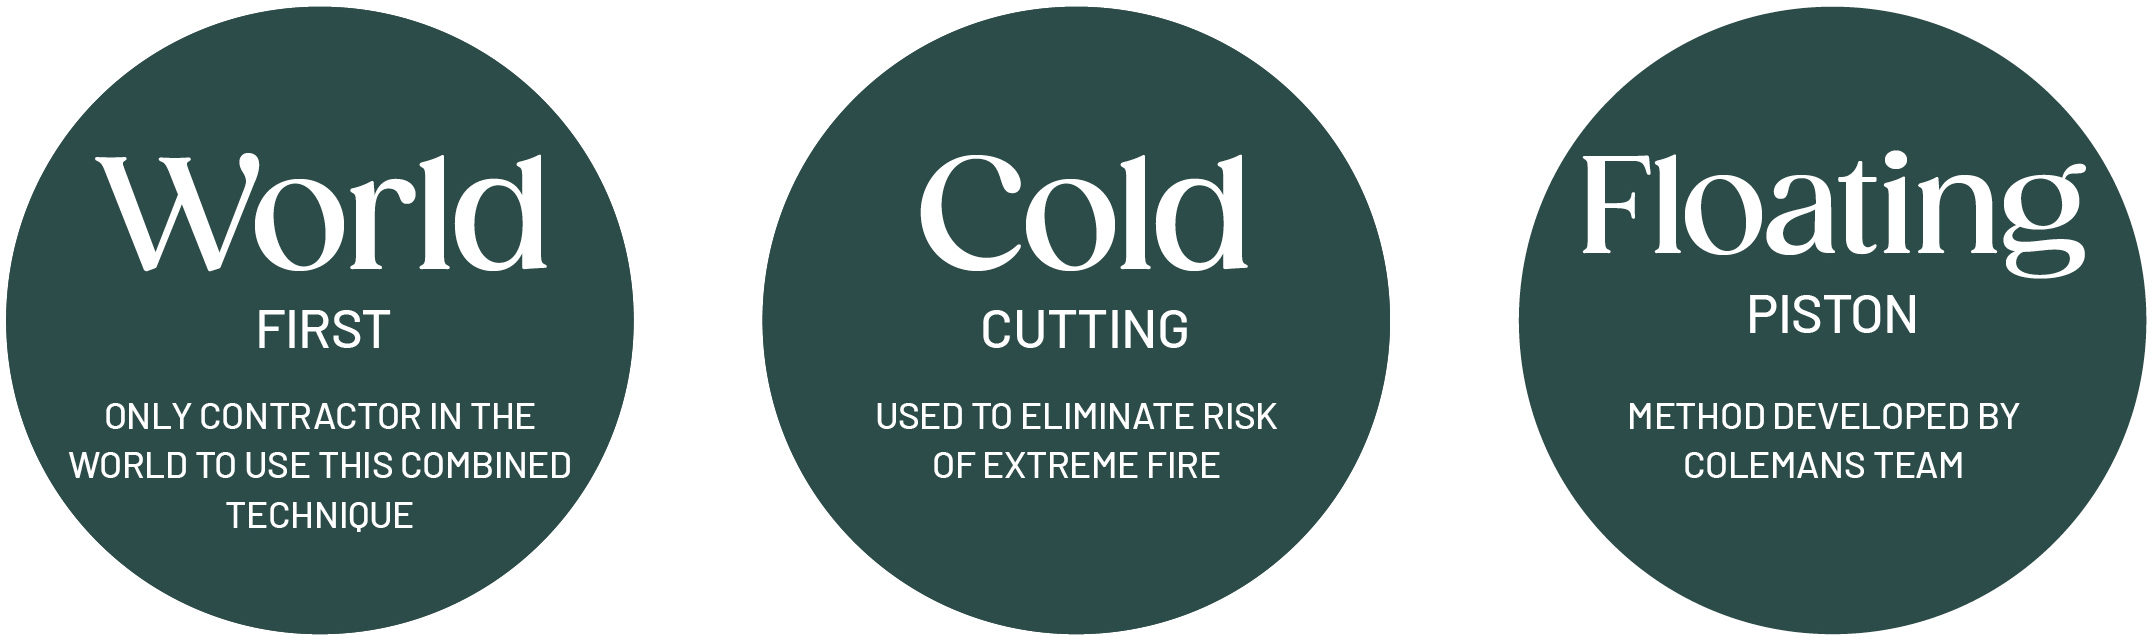 Project highlights. World first - only contractor in the world to use this combined technique. Cold cutting - used to eliminate risk of extreme fire. Floating piston - method developed by colemans team